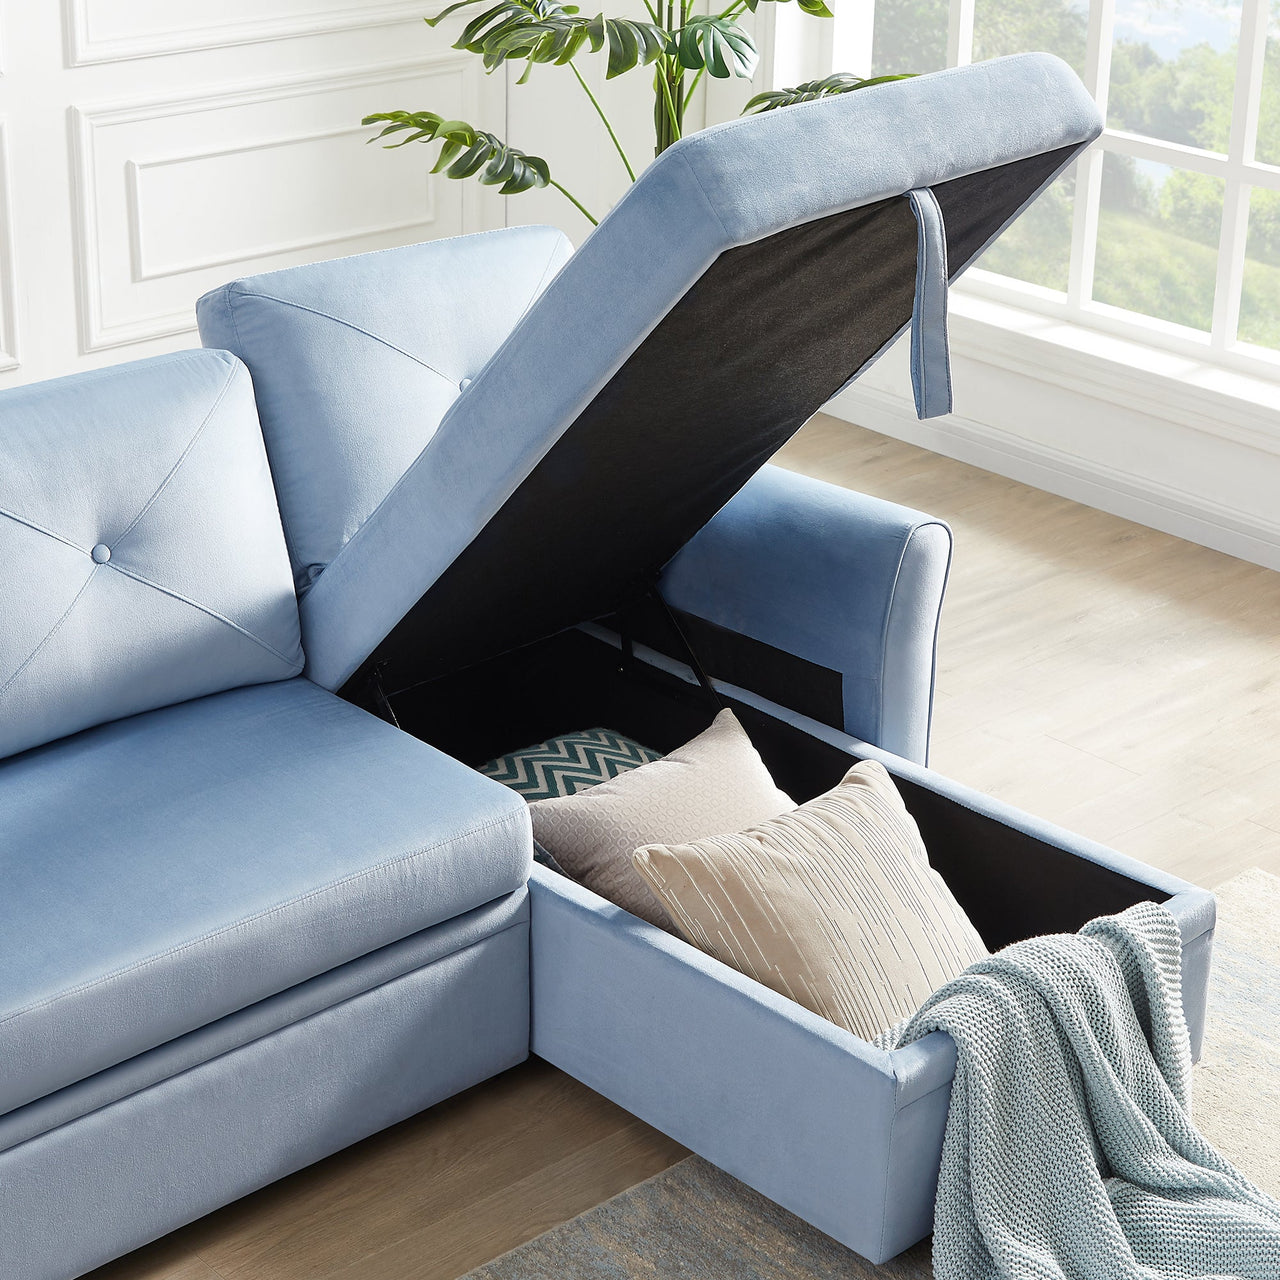 Reversible L-Shape 3 Seat Sectional Couch with Storage for Living Room - Casatrail.com